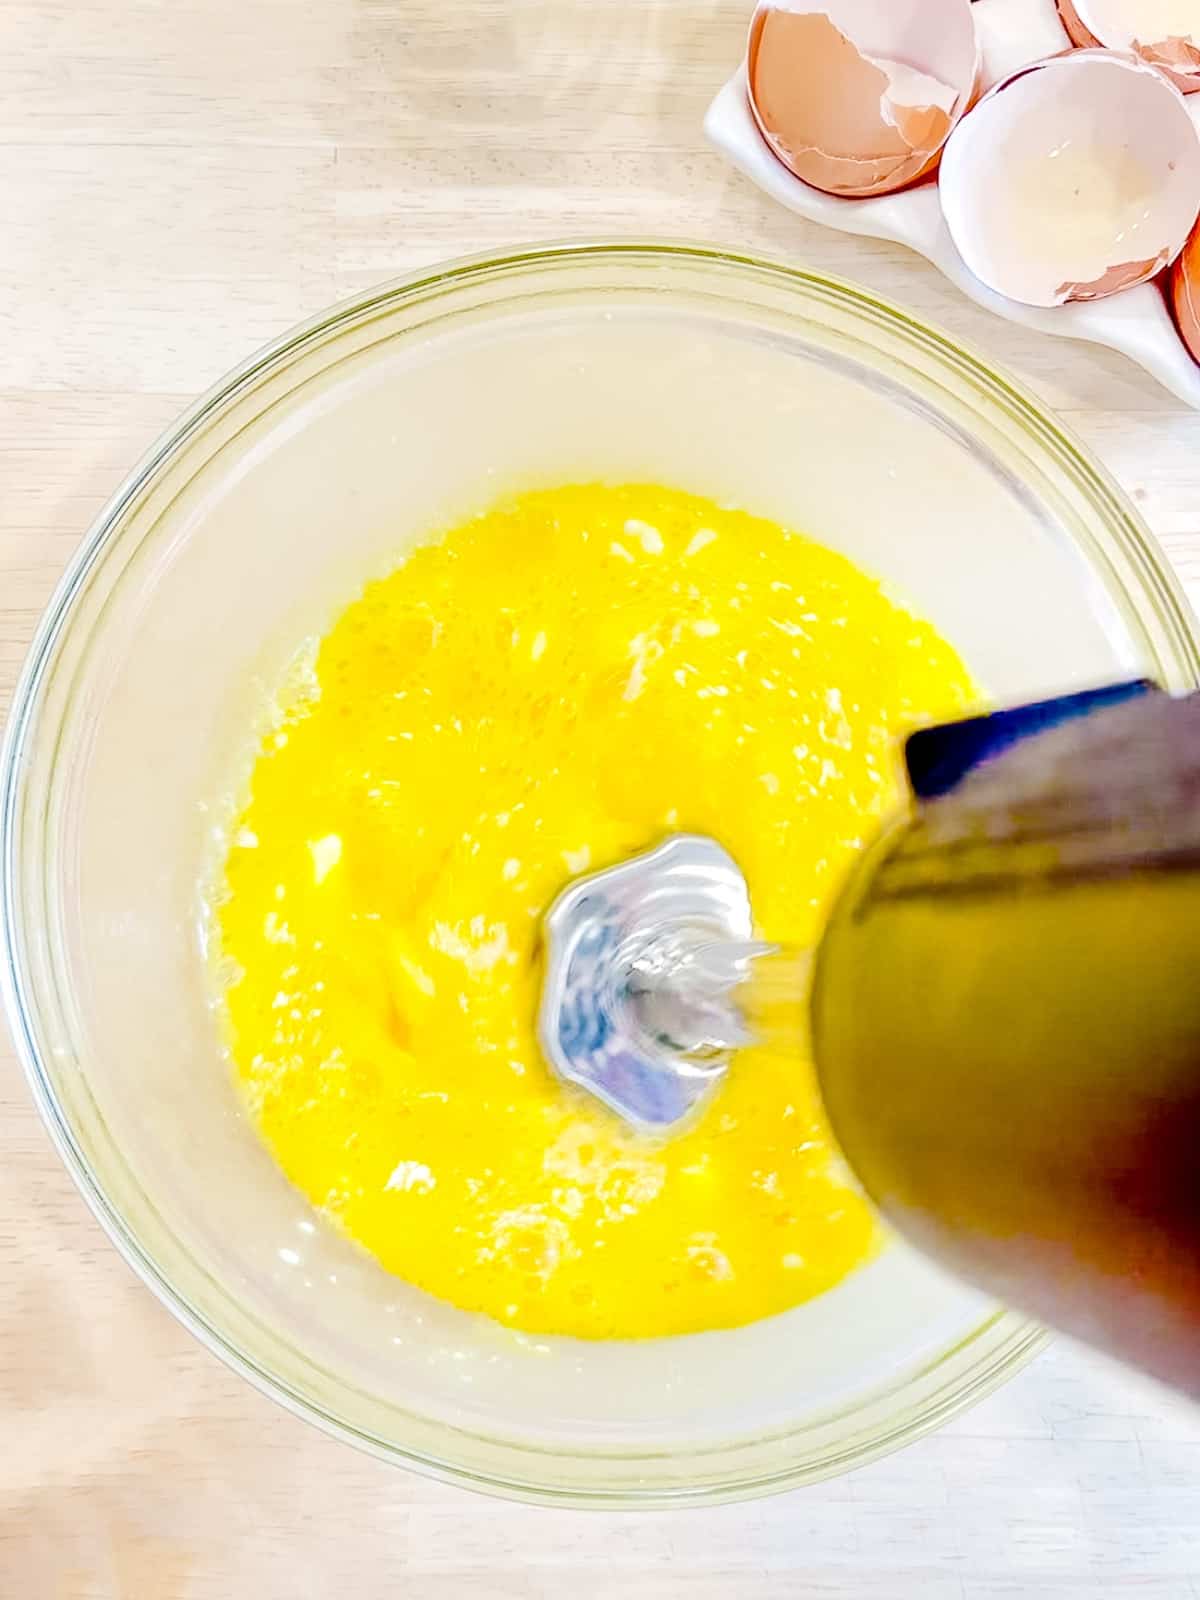 Mixing ricotta and raw eggs together with an immersion blender.